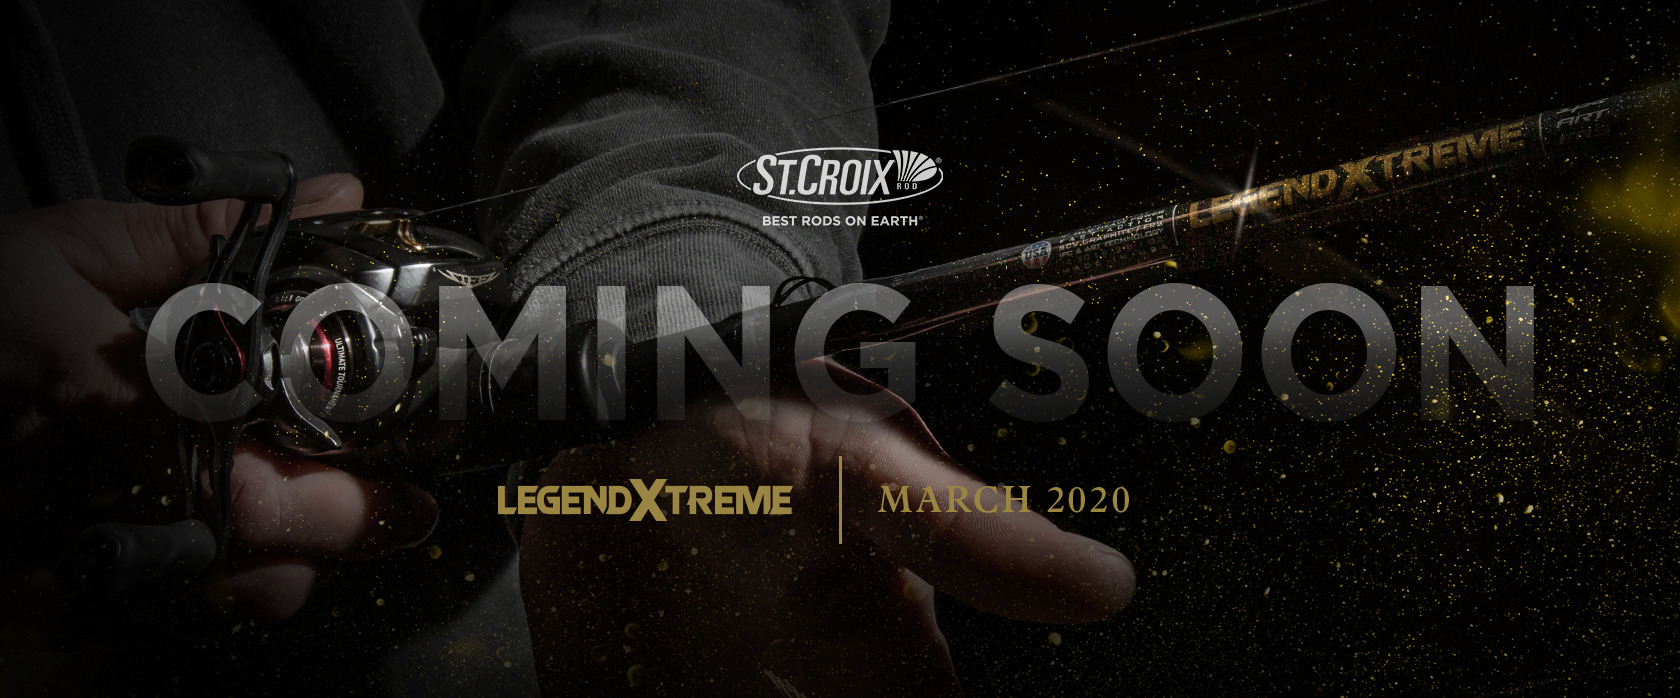 St. Croix Lifts the Veil on it's Most Sensitive Rods Ever - 2020 New Legend  Xtreme Rod - Hook, Line and Sinker - Guelph's #1 Tackle Store St. Croix  Lifts the Veil